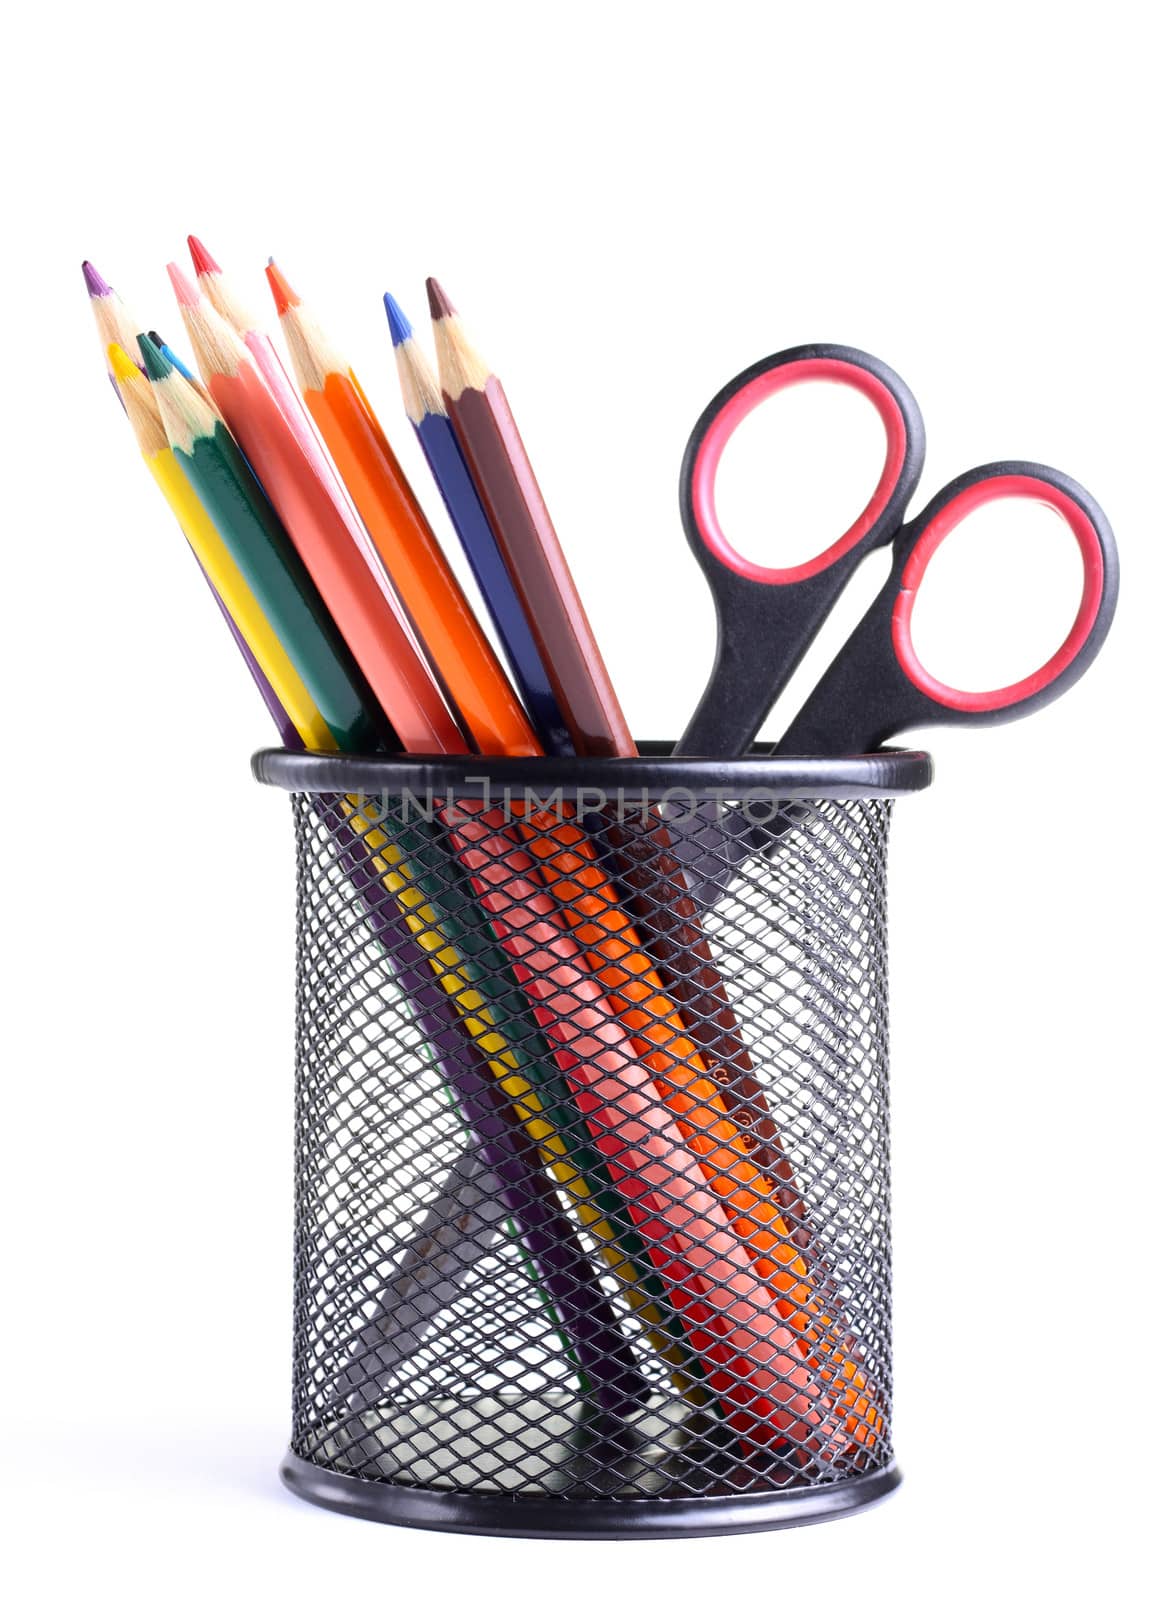 Pencils and scissors in the container isolated on the white